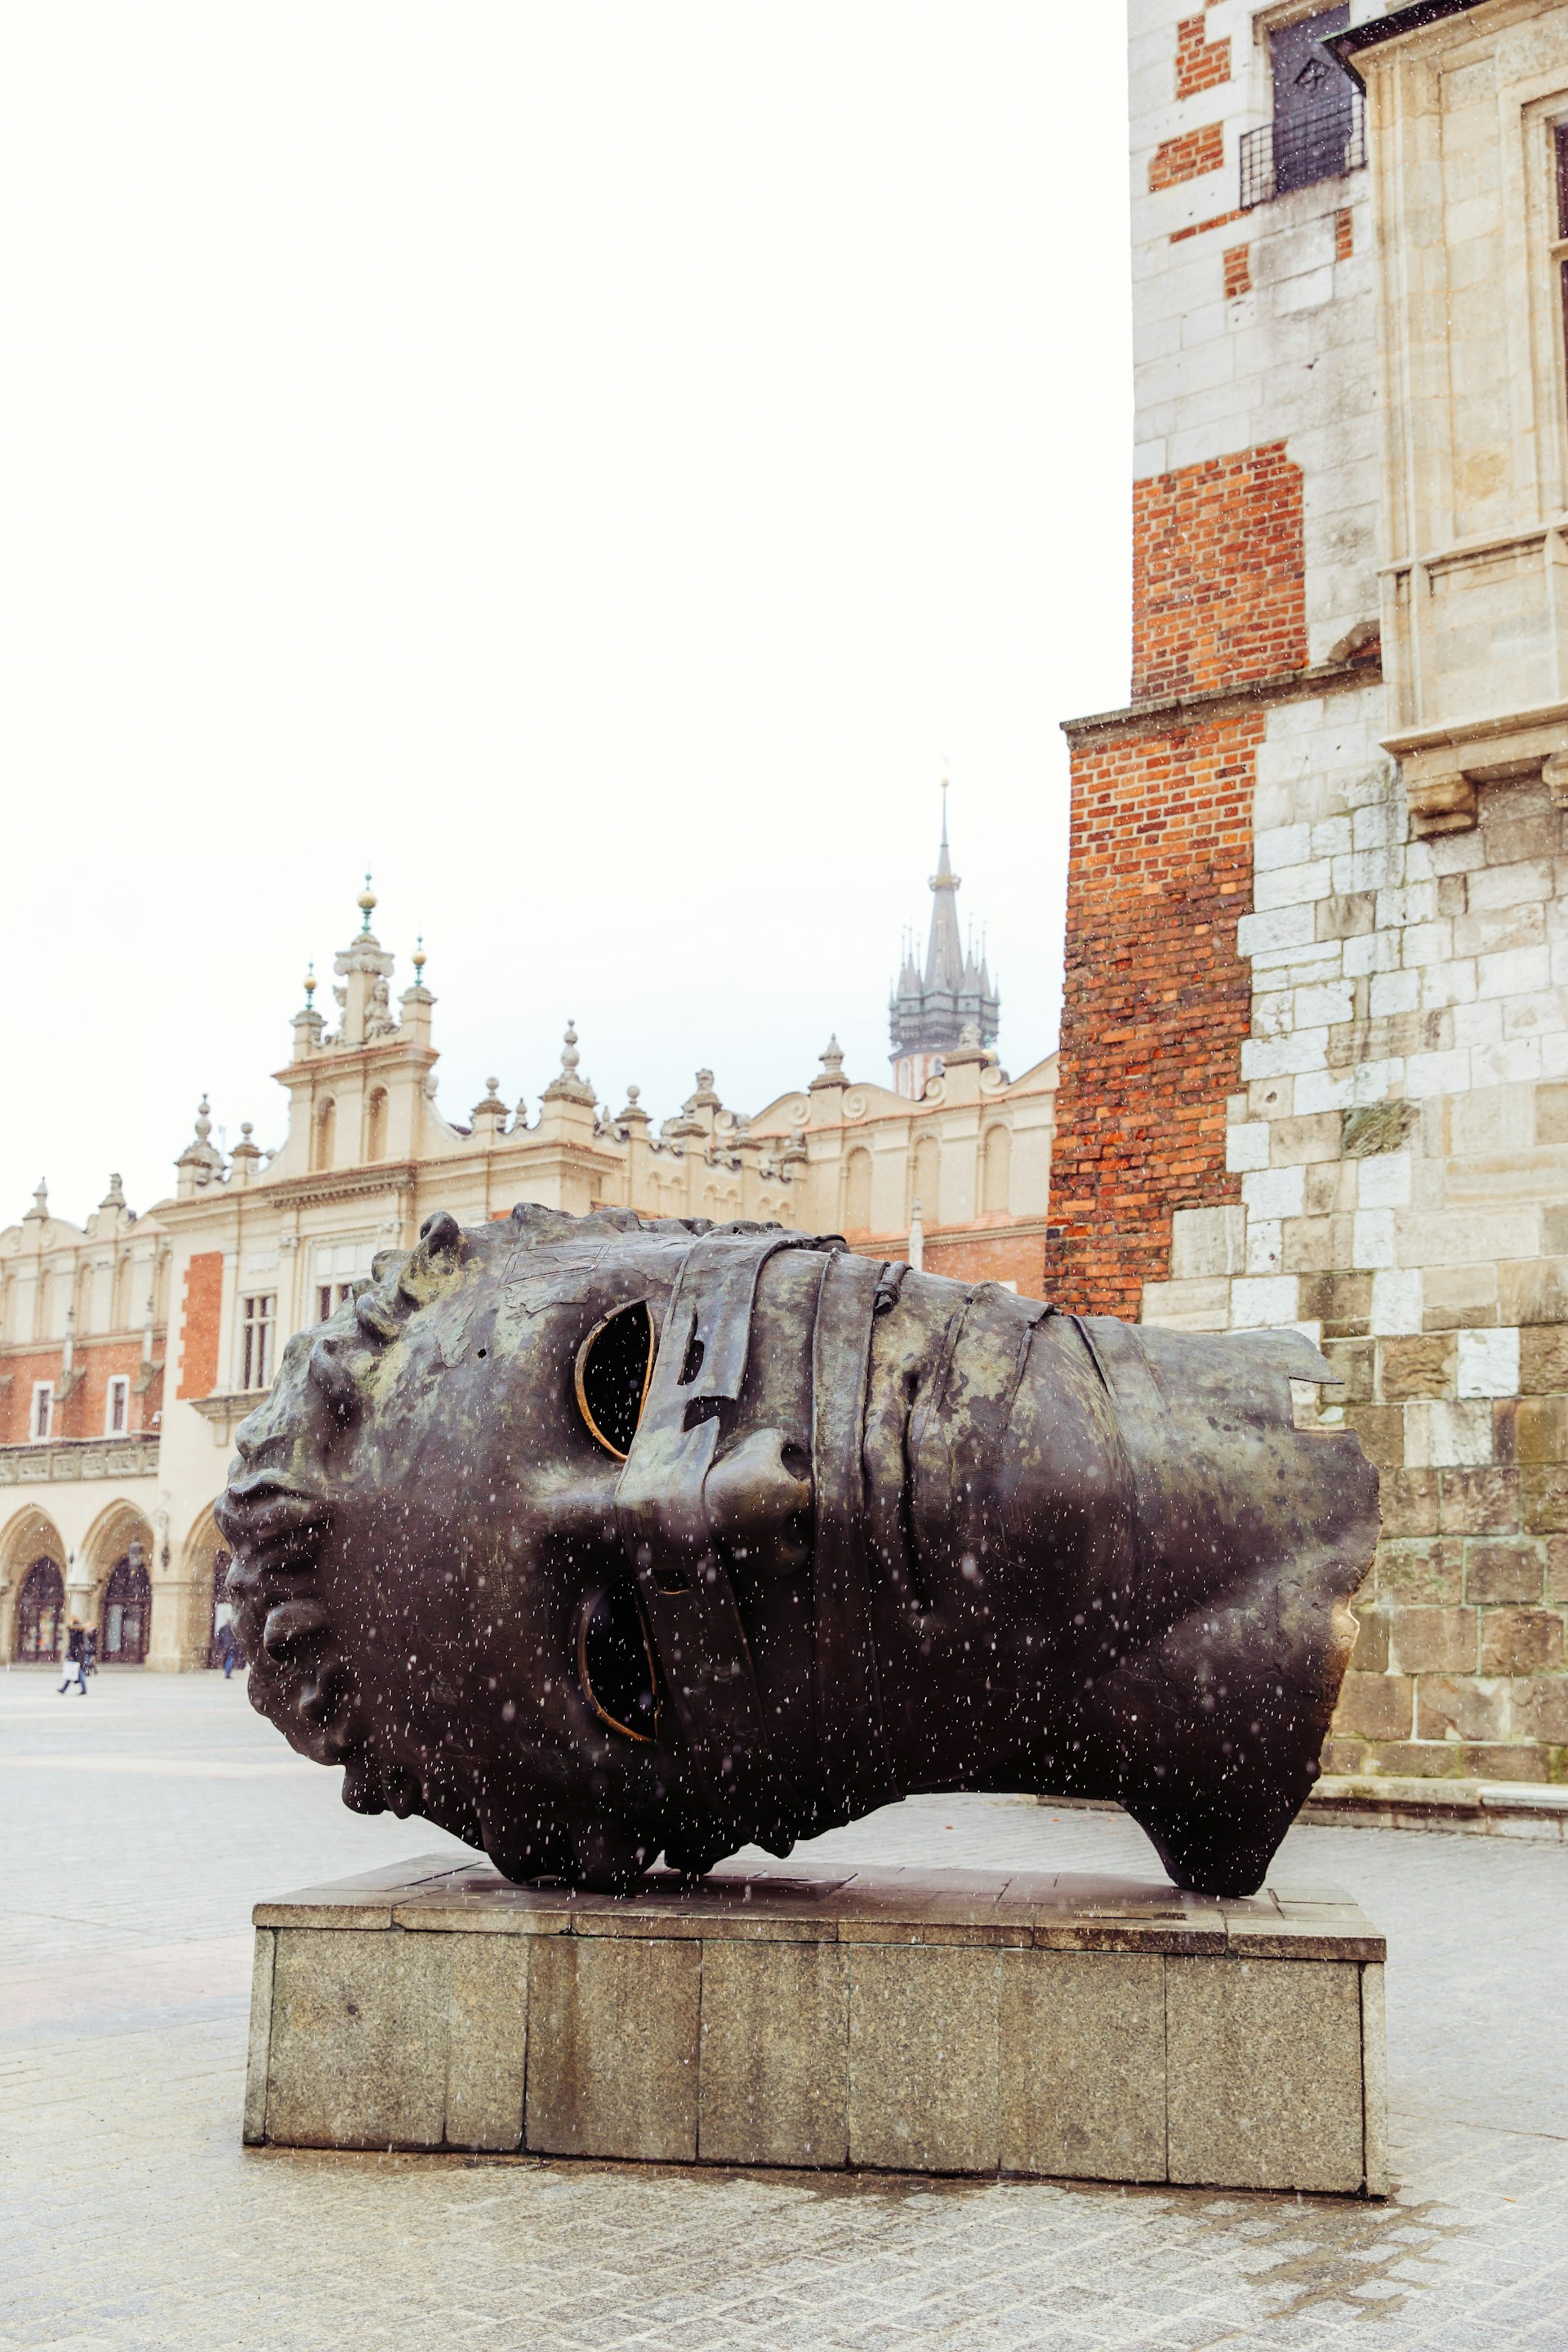 'The Head' sculpture in Market Square, Krakow with pedestrians in the background